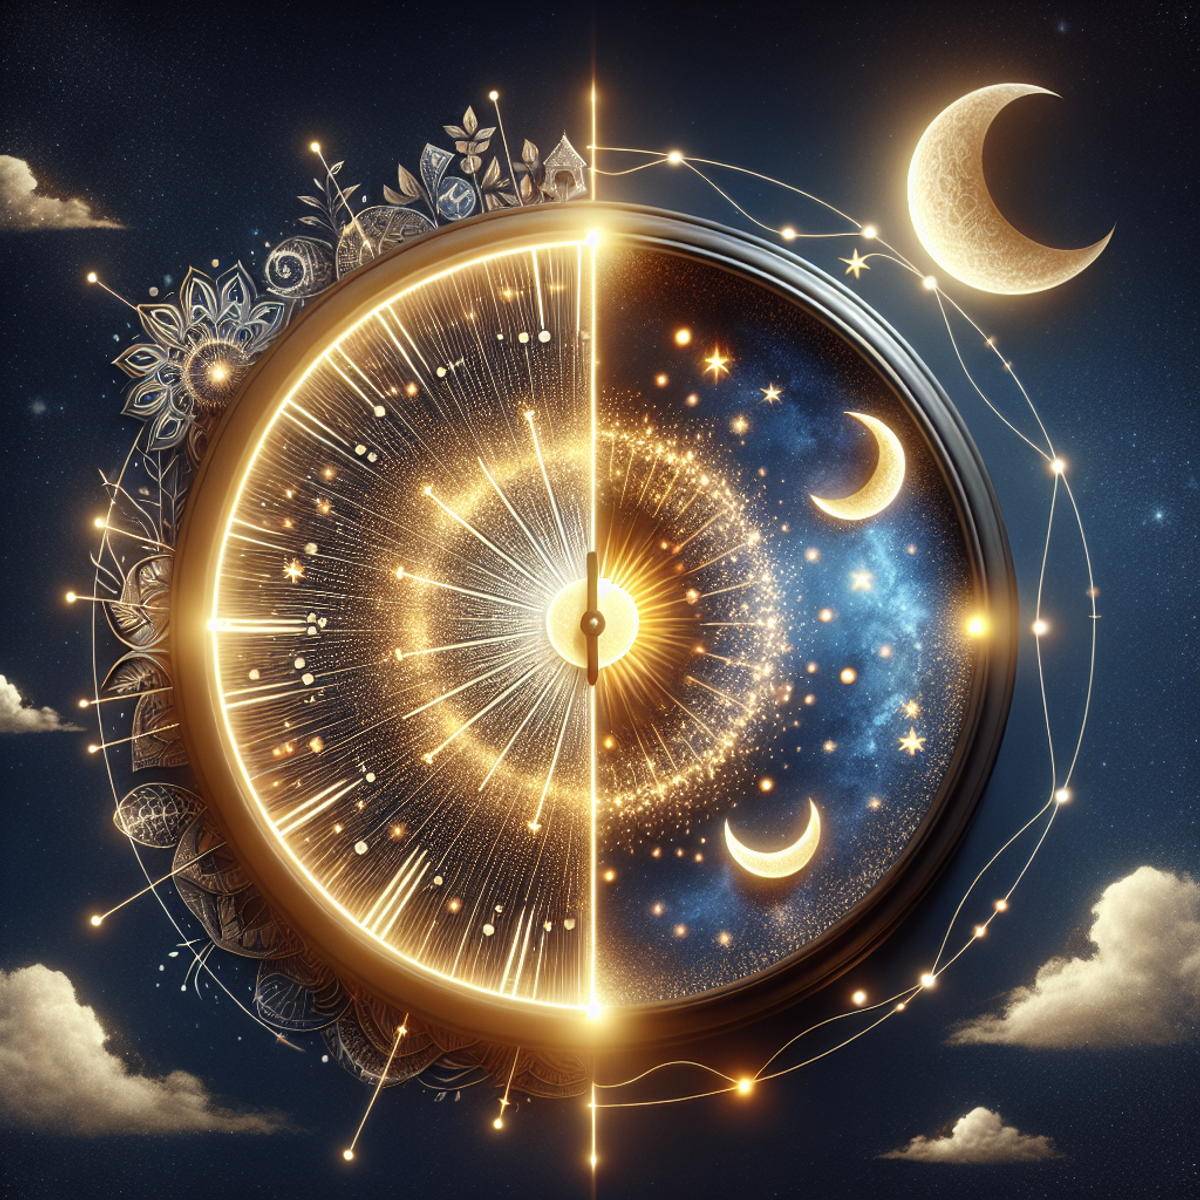 A backlit clock with one half bathed in golden sunlight and the other in moonlight, surrounded by stylized moon and sun figures. Melatonin is represented by twinkling dots flowing around the clock.